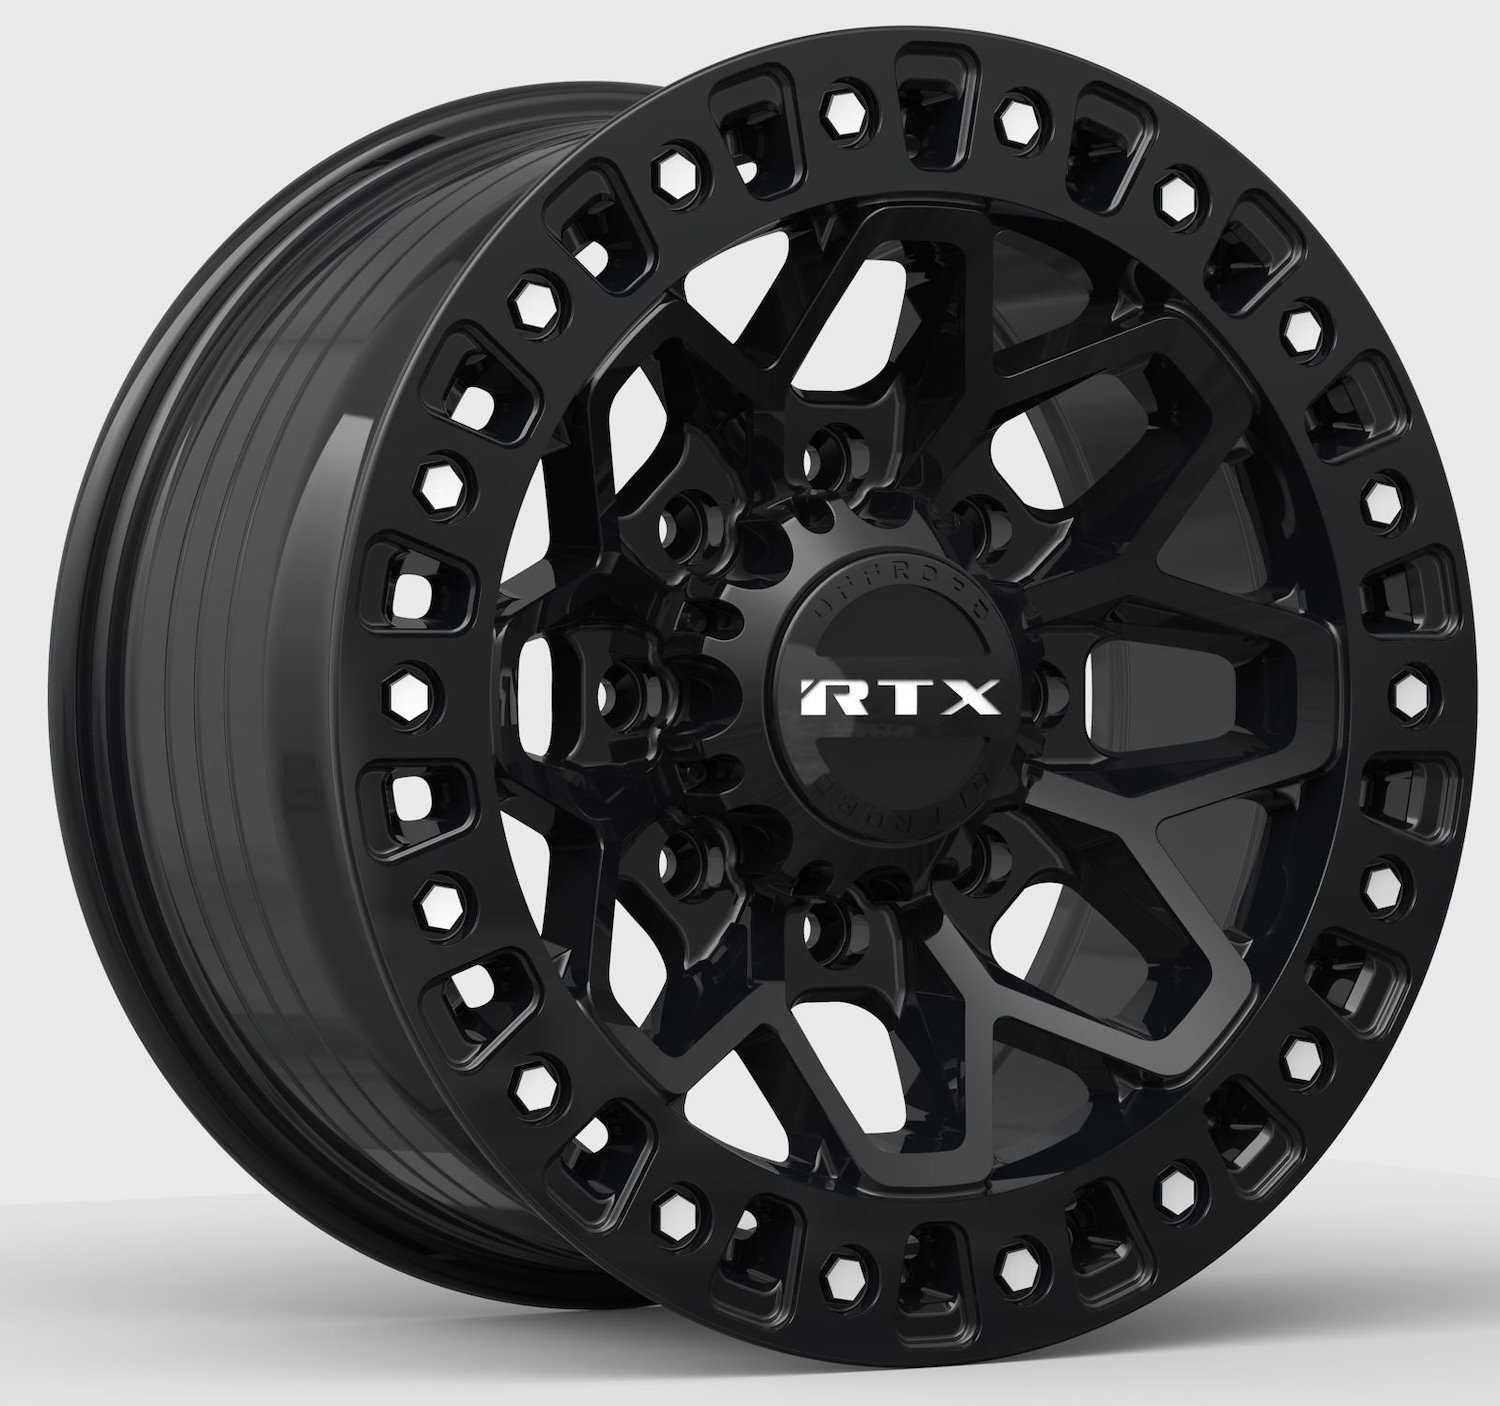 083191 Off-Road Series Zion Wheel [Size: 17" x 9"] Gloss Black Milled Rivets Finish